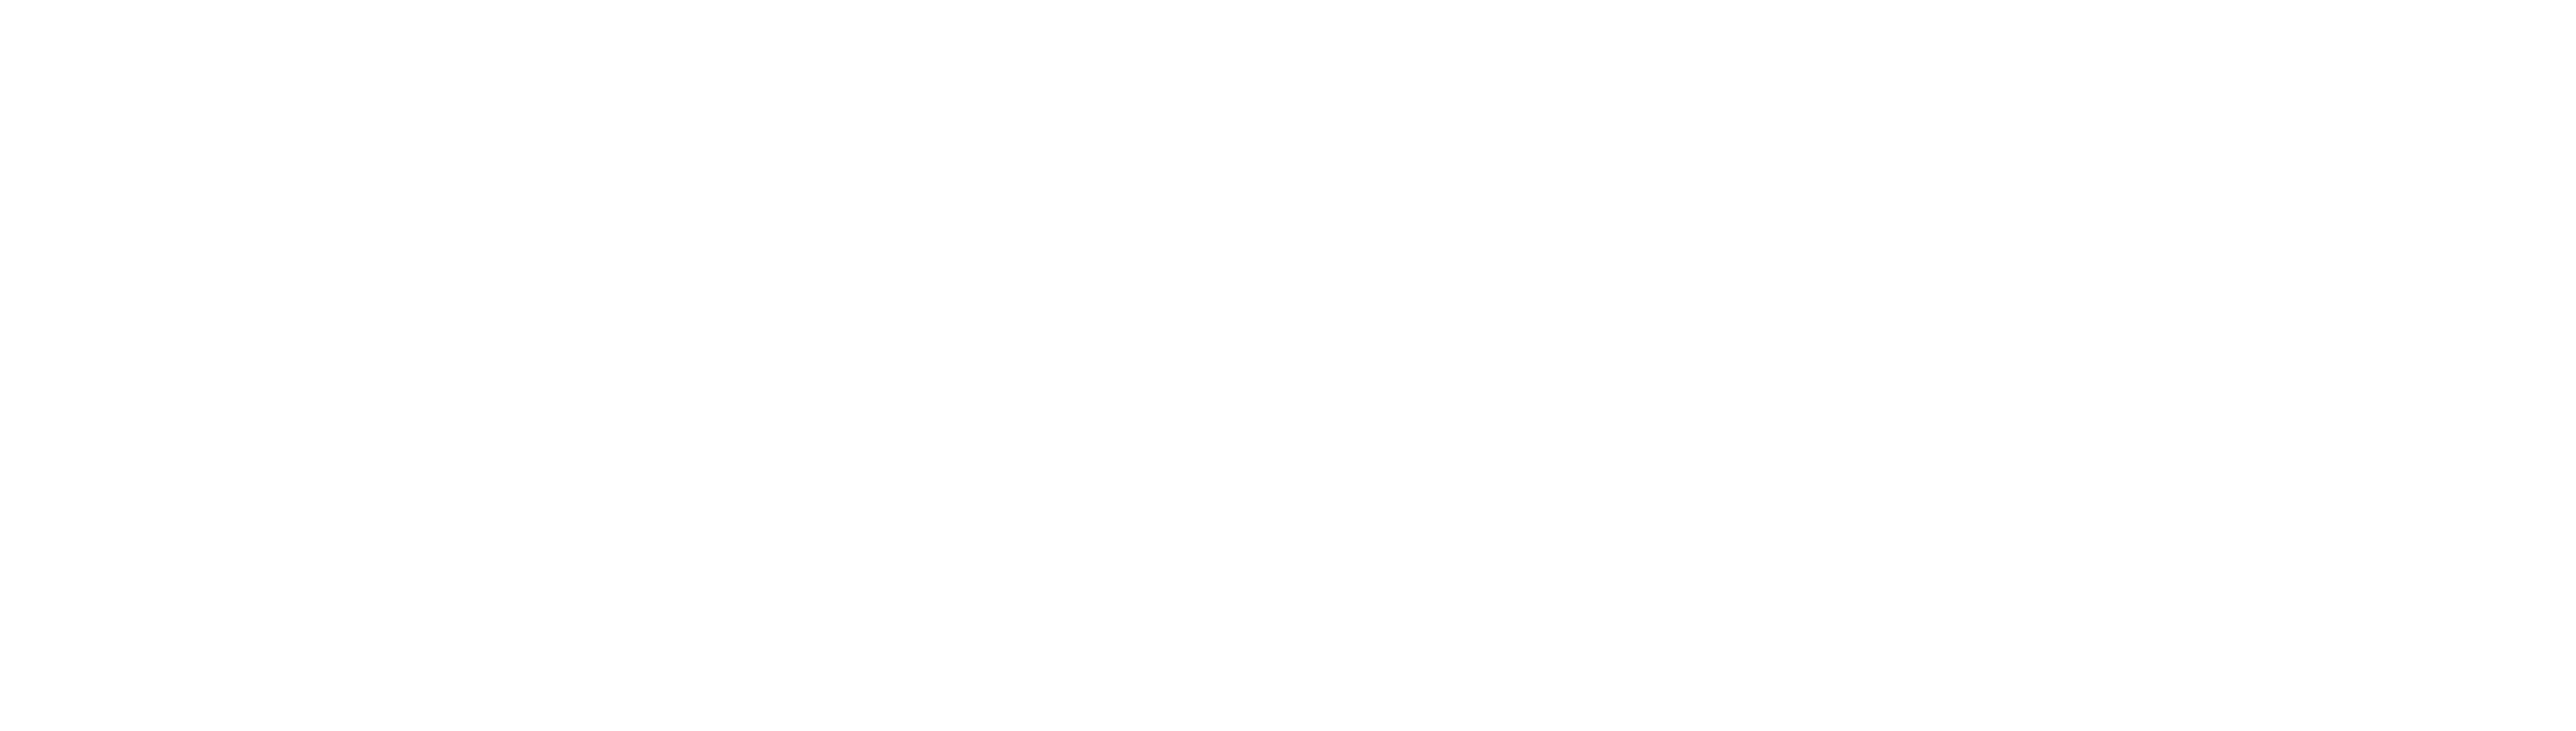 Ascent Protein logo